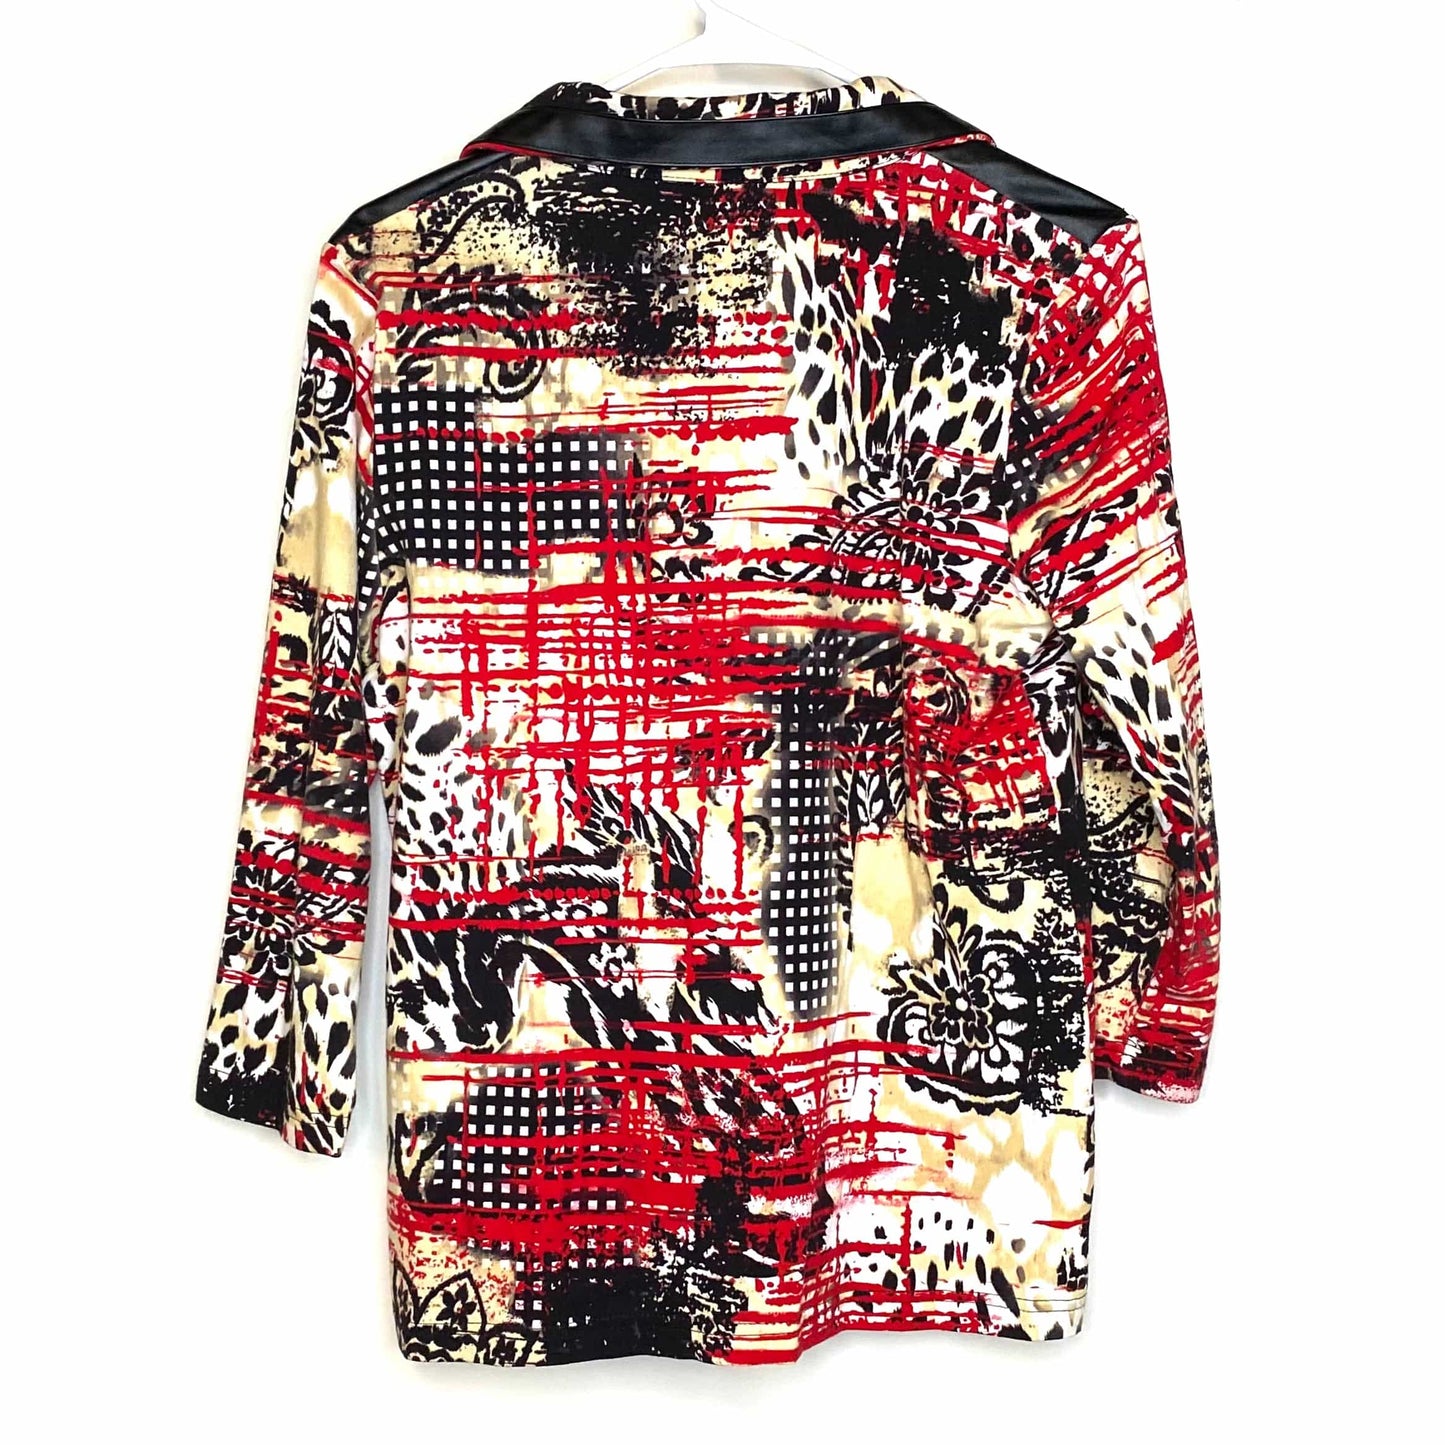 Onque Casuals Womens Size S Multicolor Abstract Pattern Full Zipper Light Jacket L/s EUC